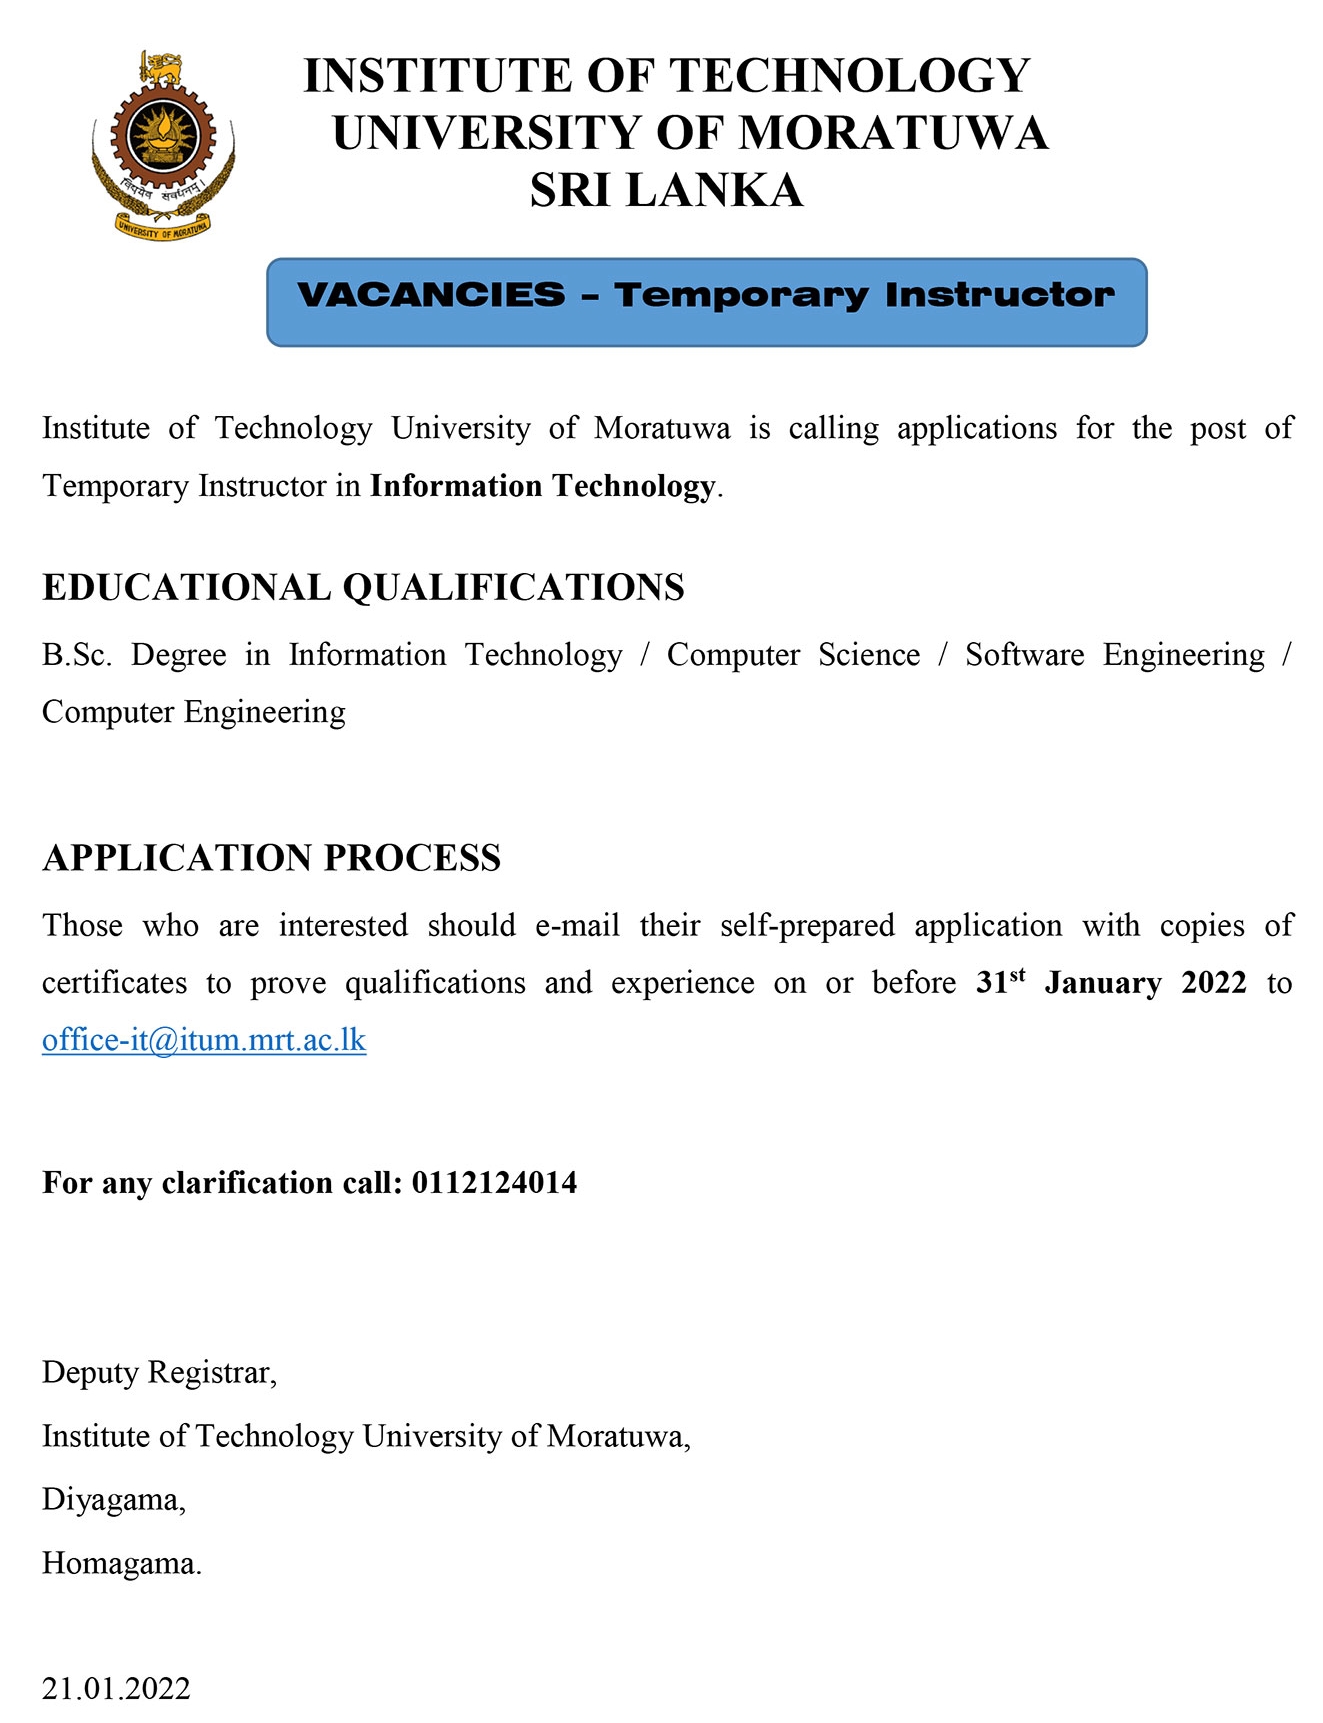 Temporary IT Instructor Job Vacancy in University of Moratuwa Details & Applications Forms